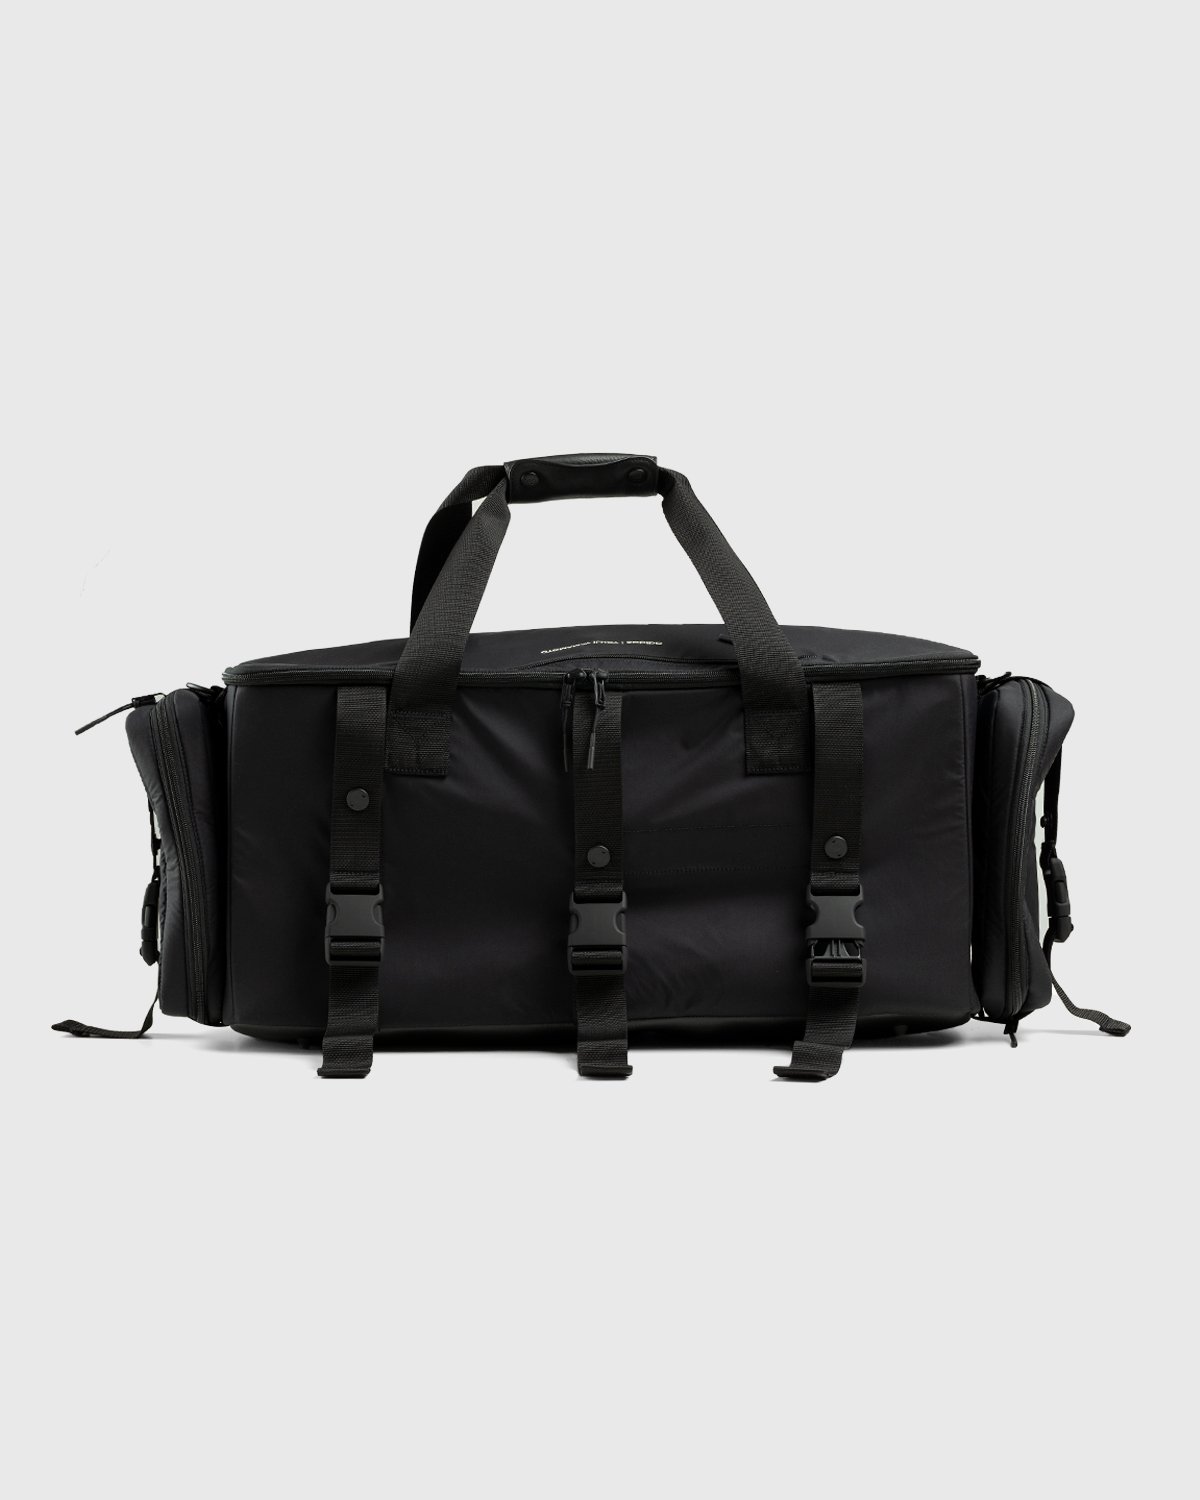 Y-3 - Mobile Archive Hold-All Duffle Bag Black - Accessories - Black - Image 2